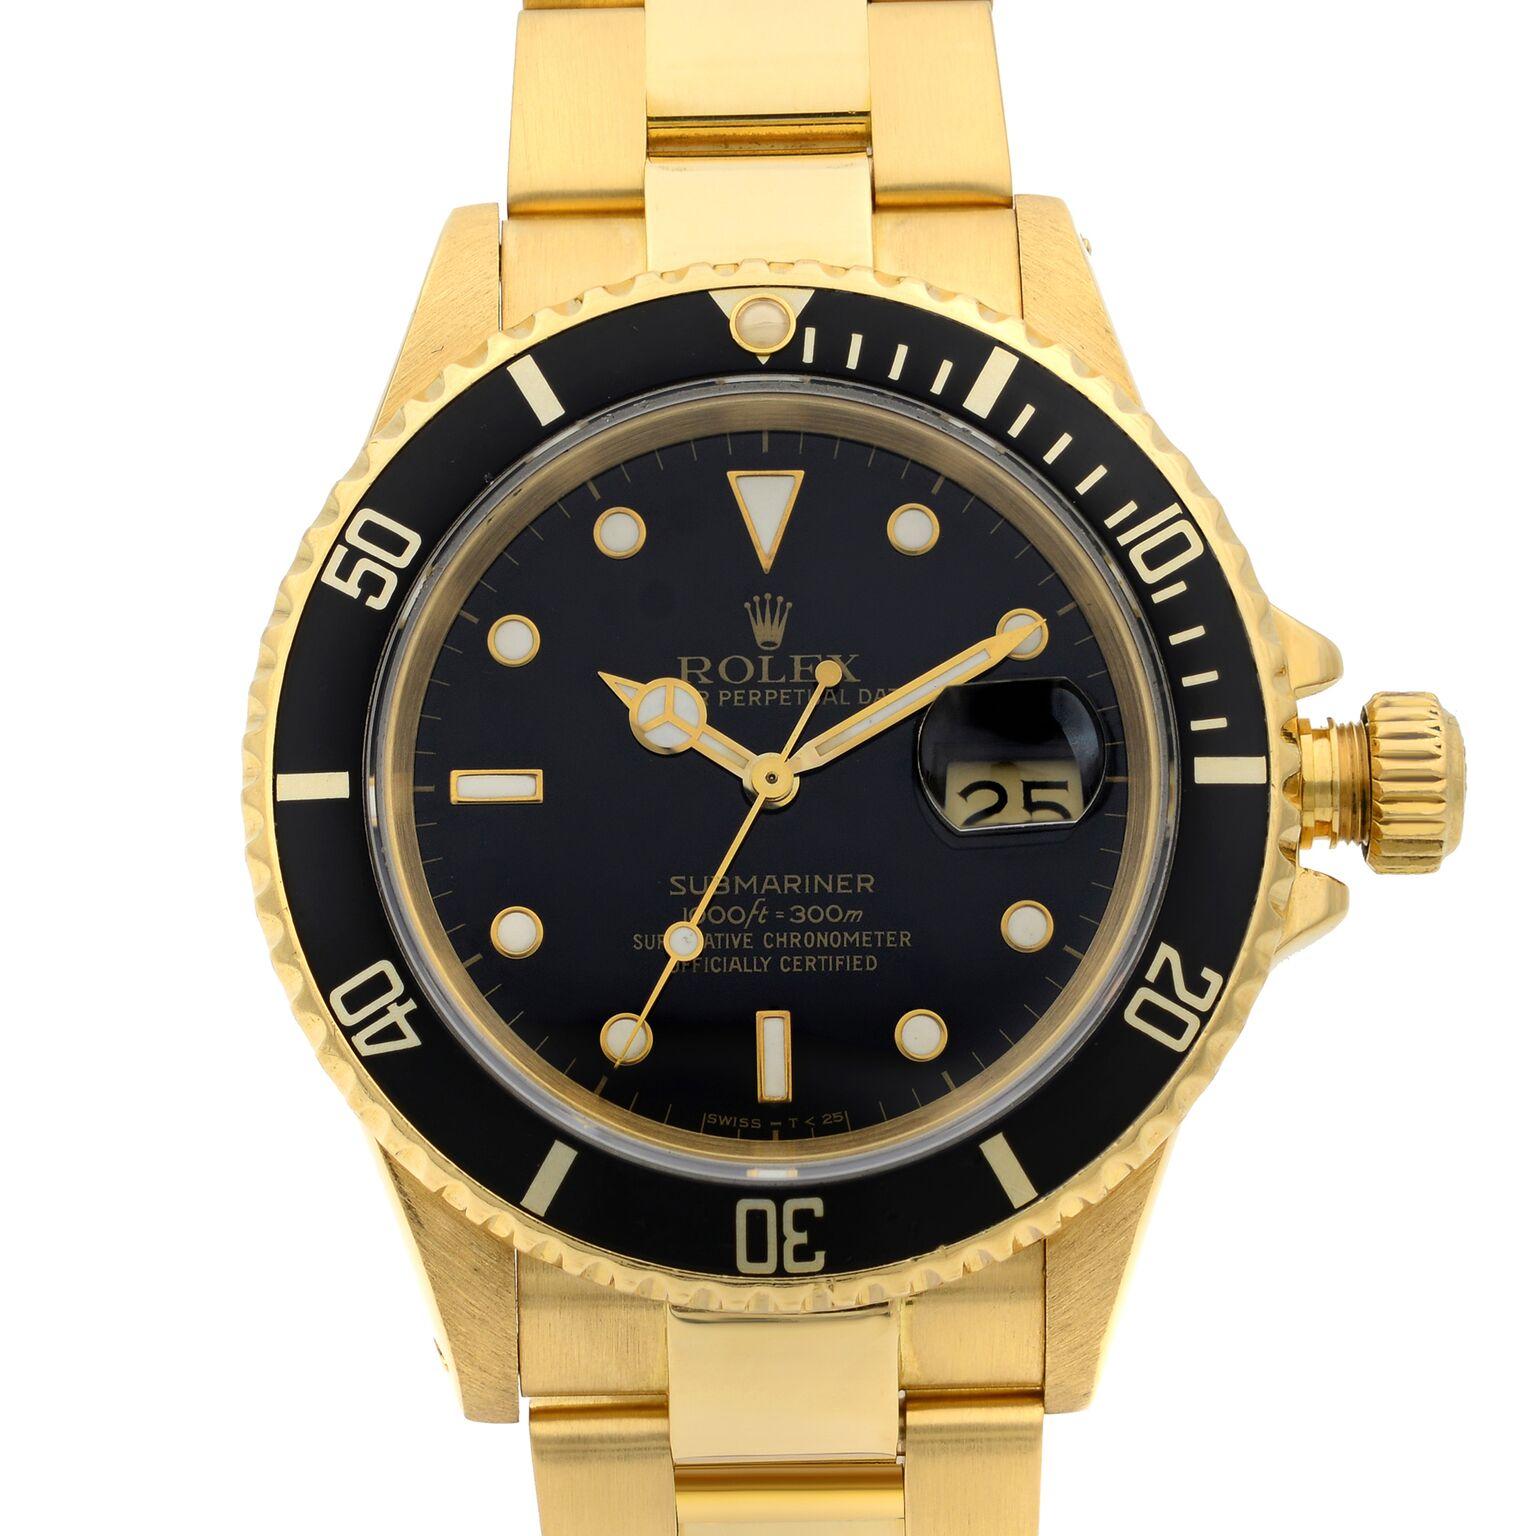 This pre-owned Rolex Submariner 16618 is a beautiful men's timepiece that is powered by mechanical (automatic) movement which is cased in a yellow gold case. It has a round shape face, date indicator dial and has hand sticks & dots style markers. It